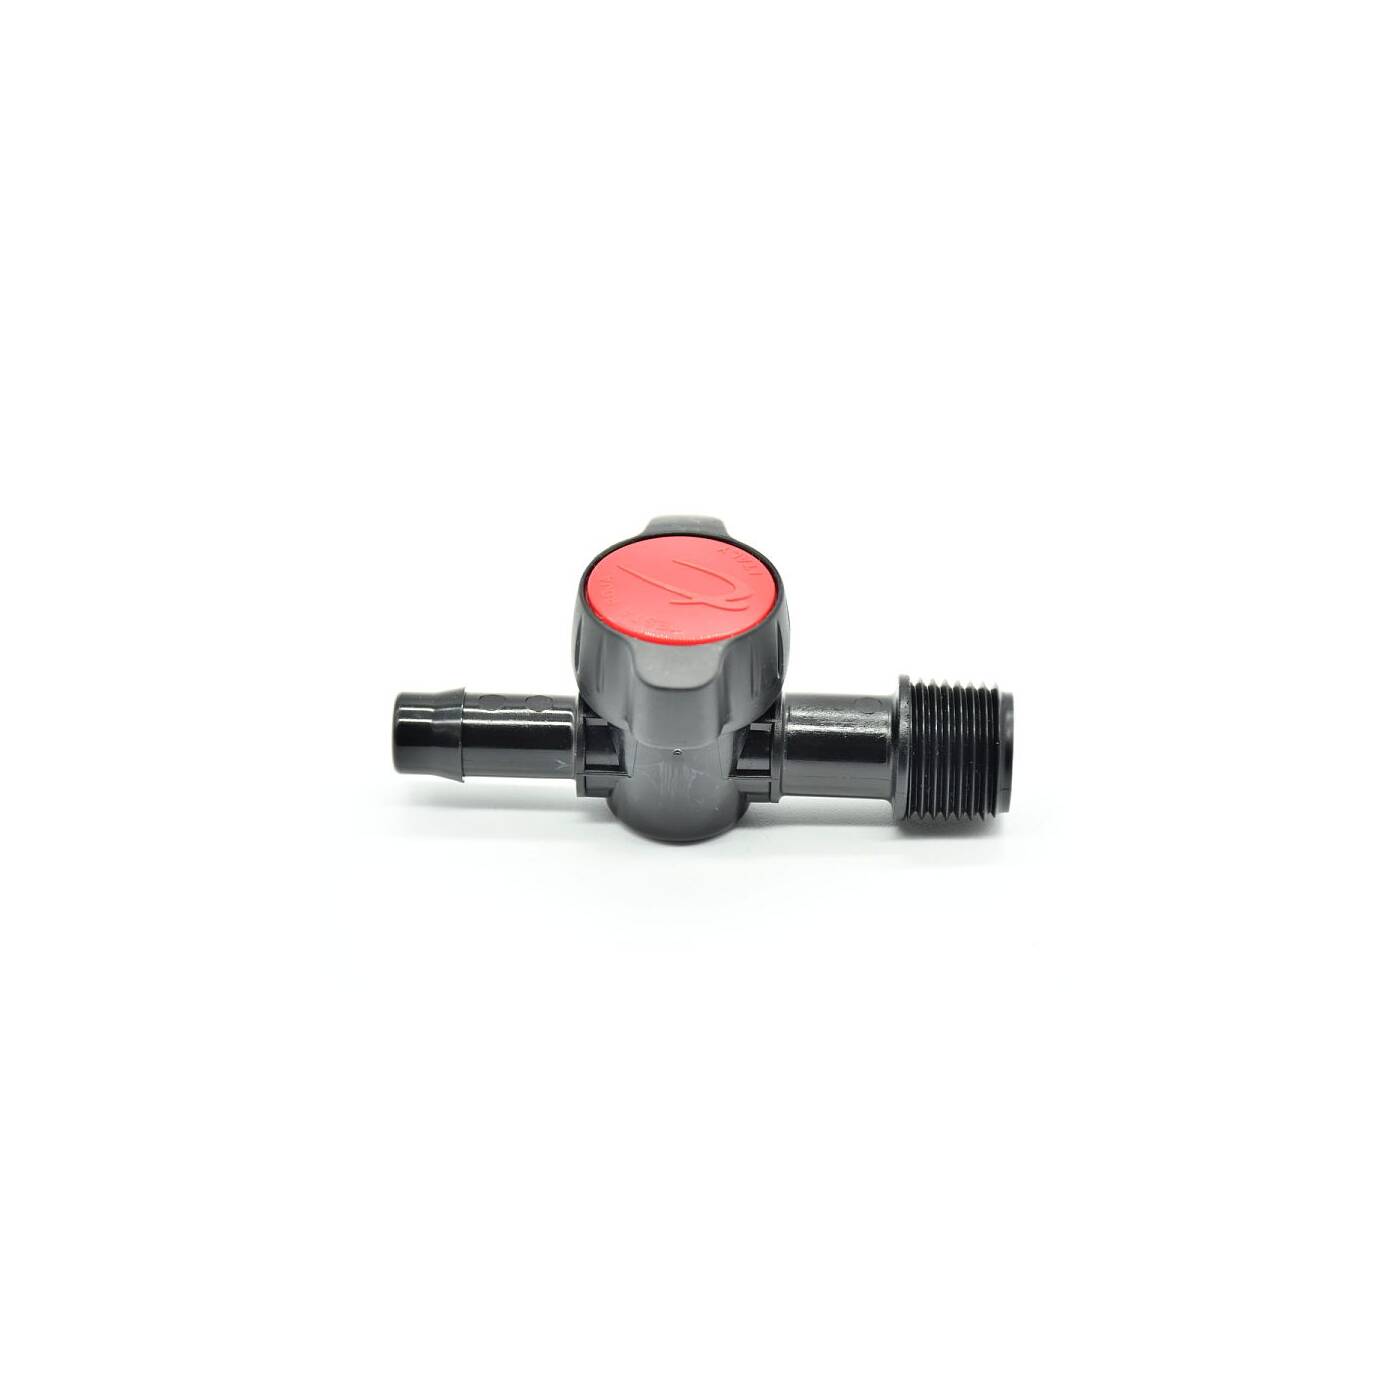 Stopcock Ball Valve Lock for PE Pipe PN4 16 20 MM with 1/2" 3/4" IG 